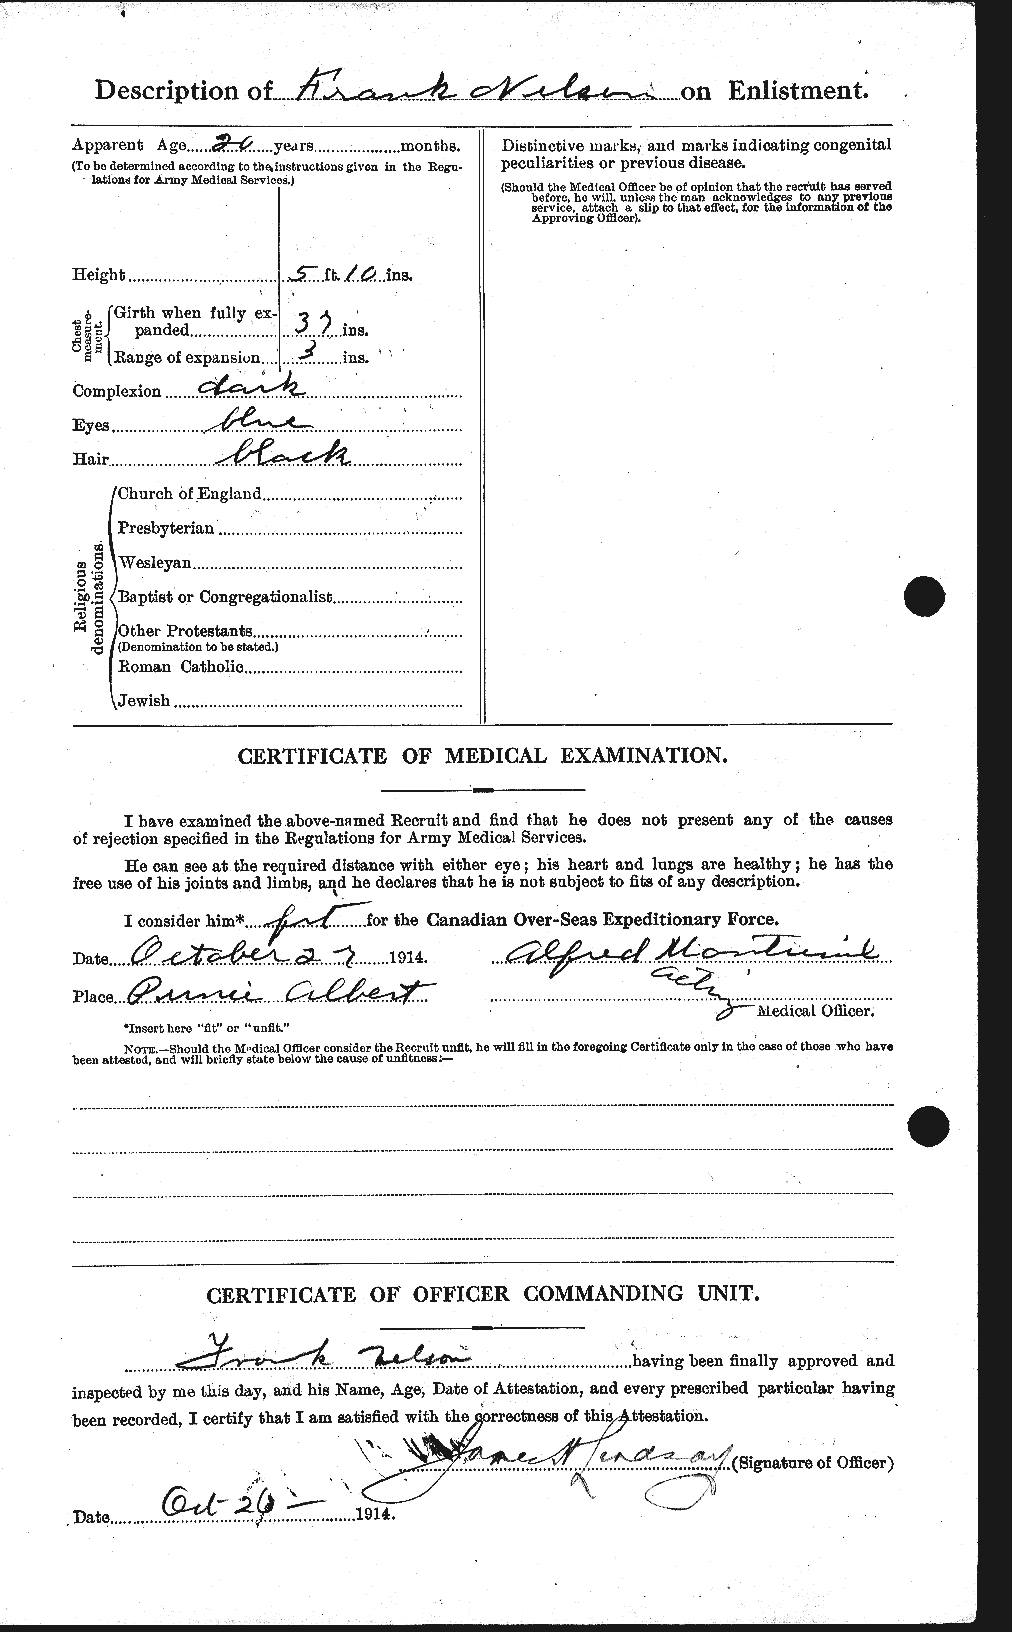 Personnel Records of the First World War - CEF 543760b